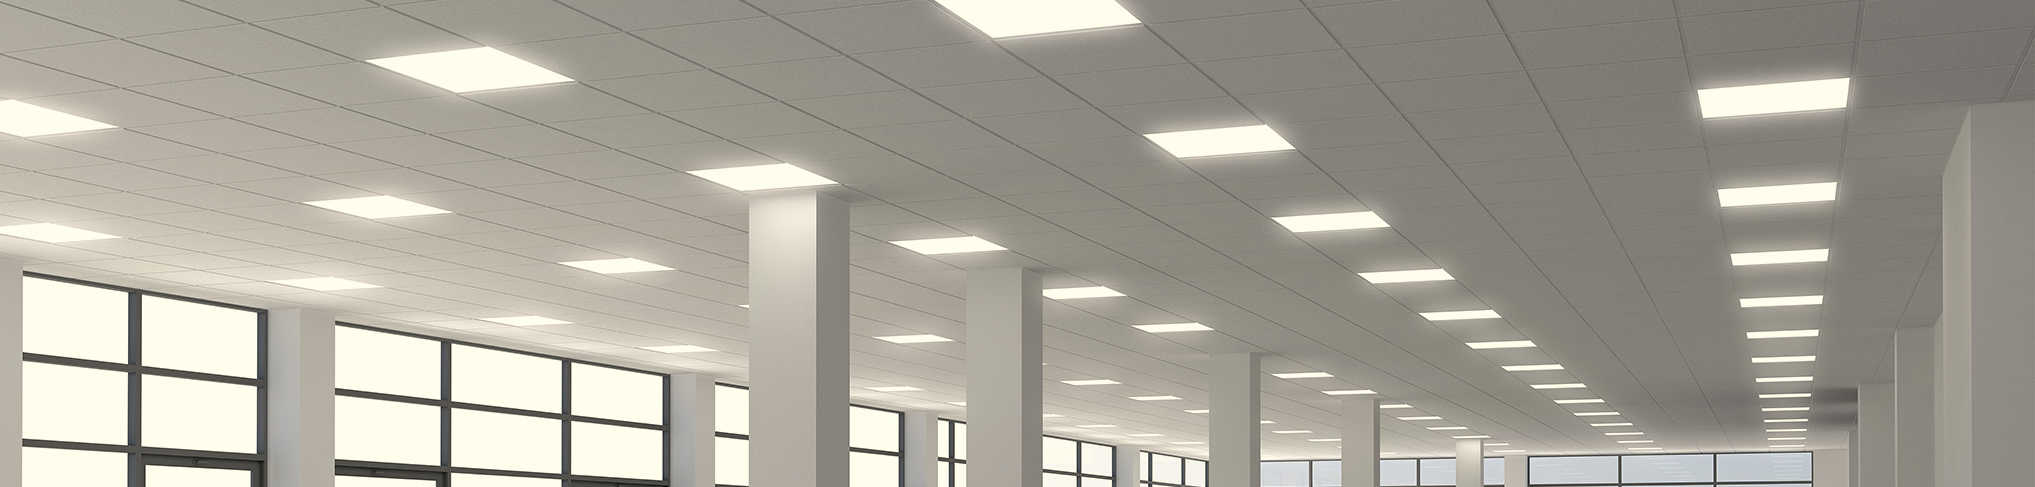 ceiling with led lighting